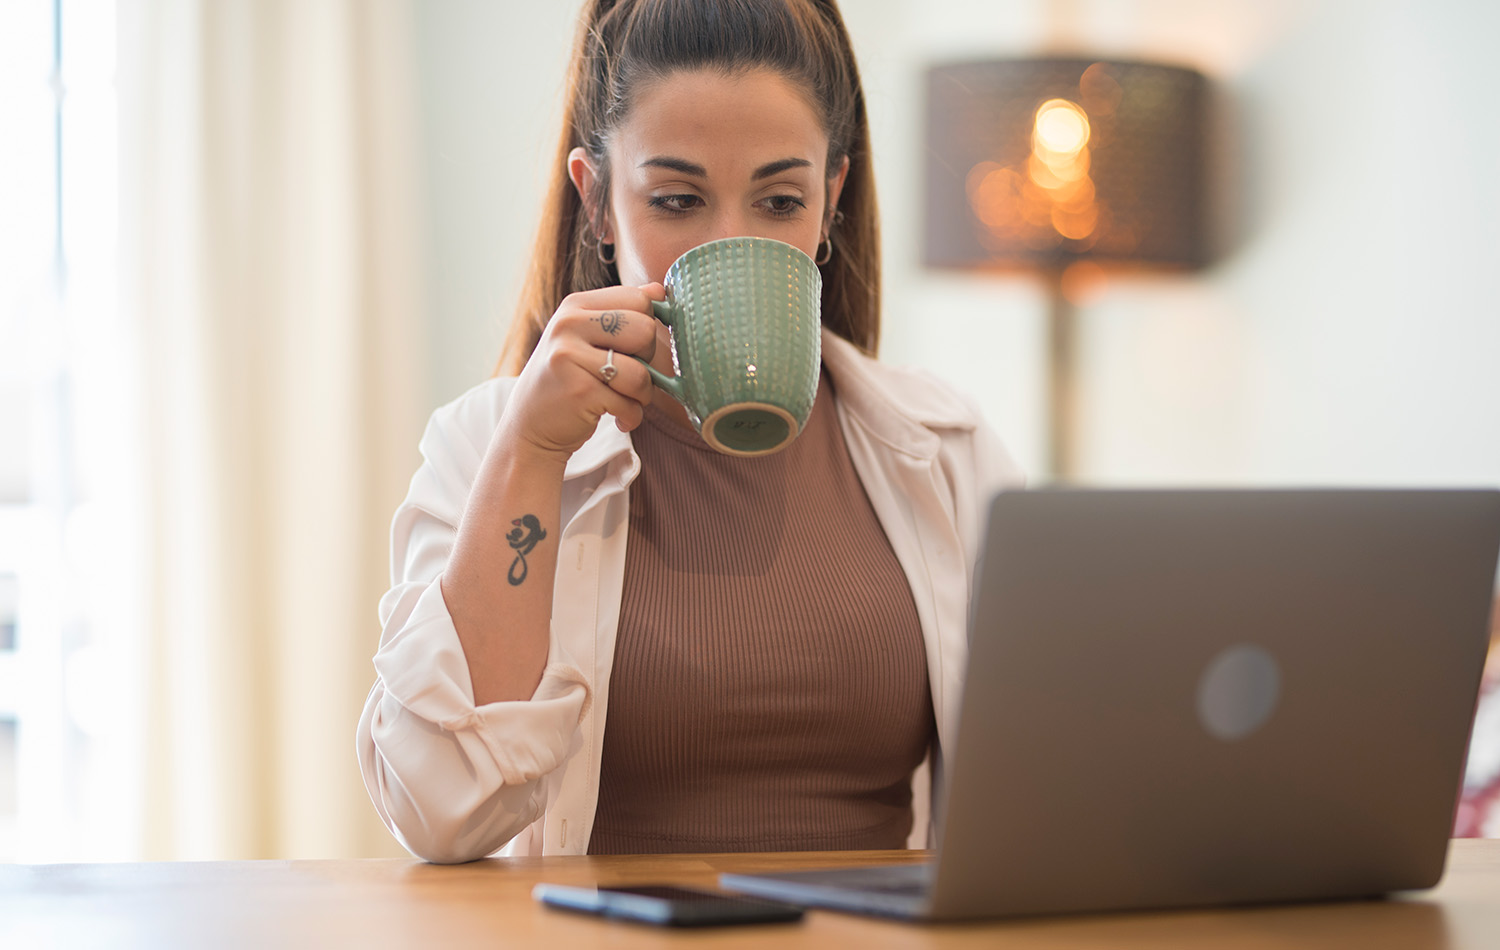 woman reading from a laptop computer drinking from a mug